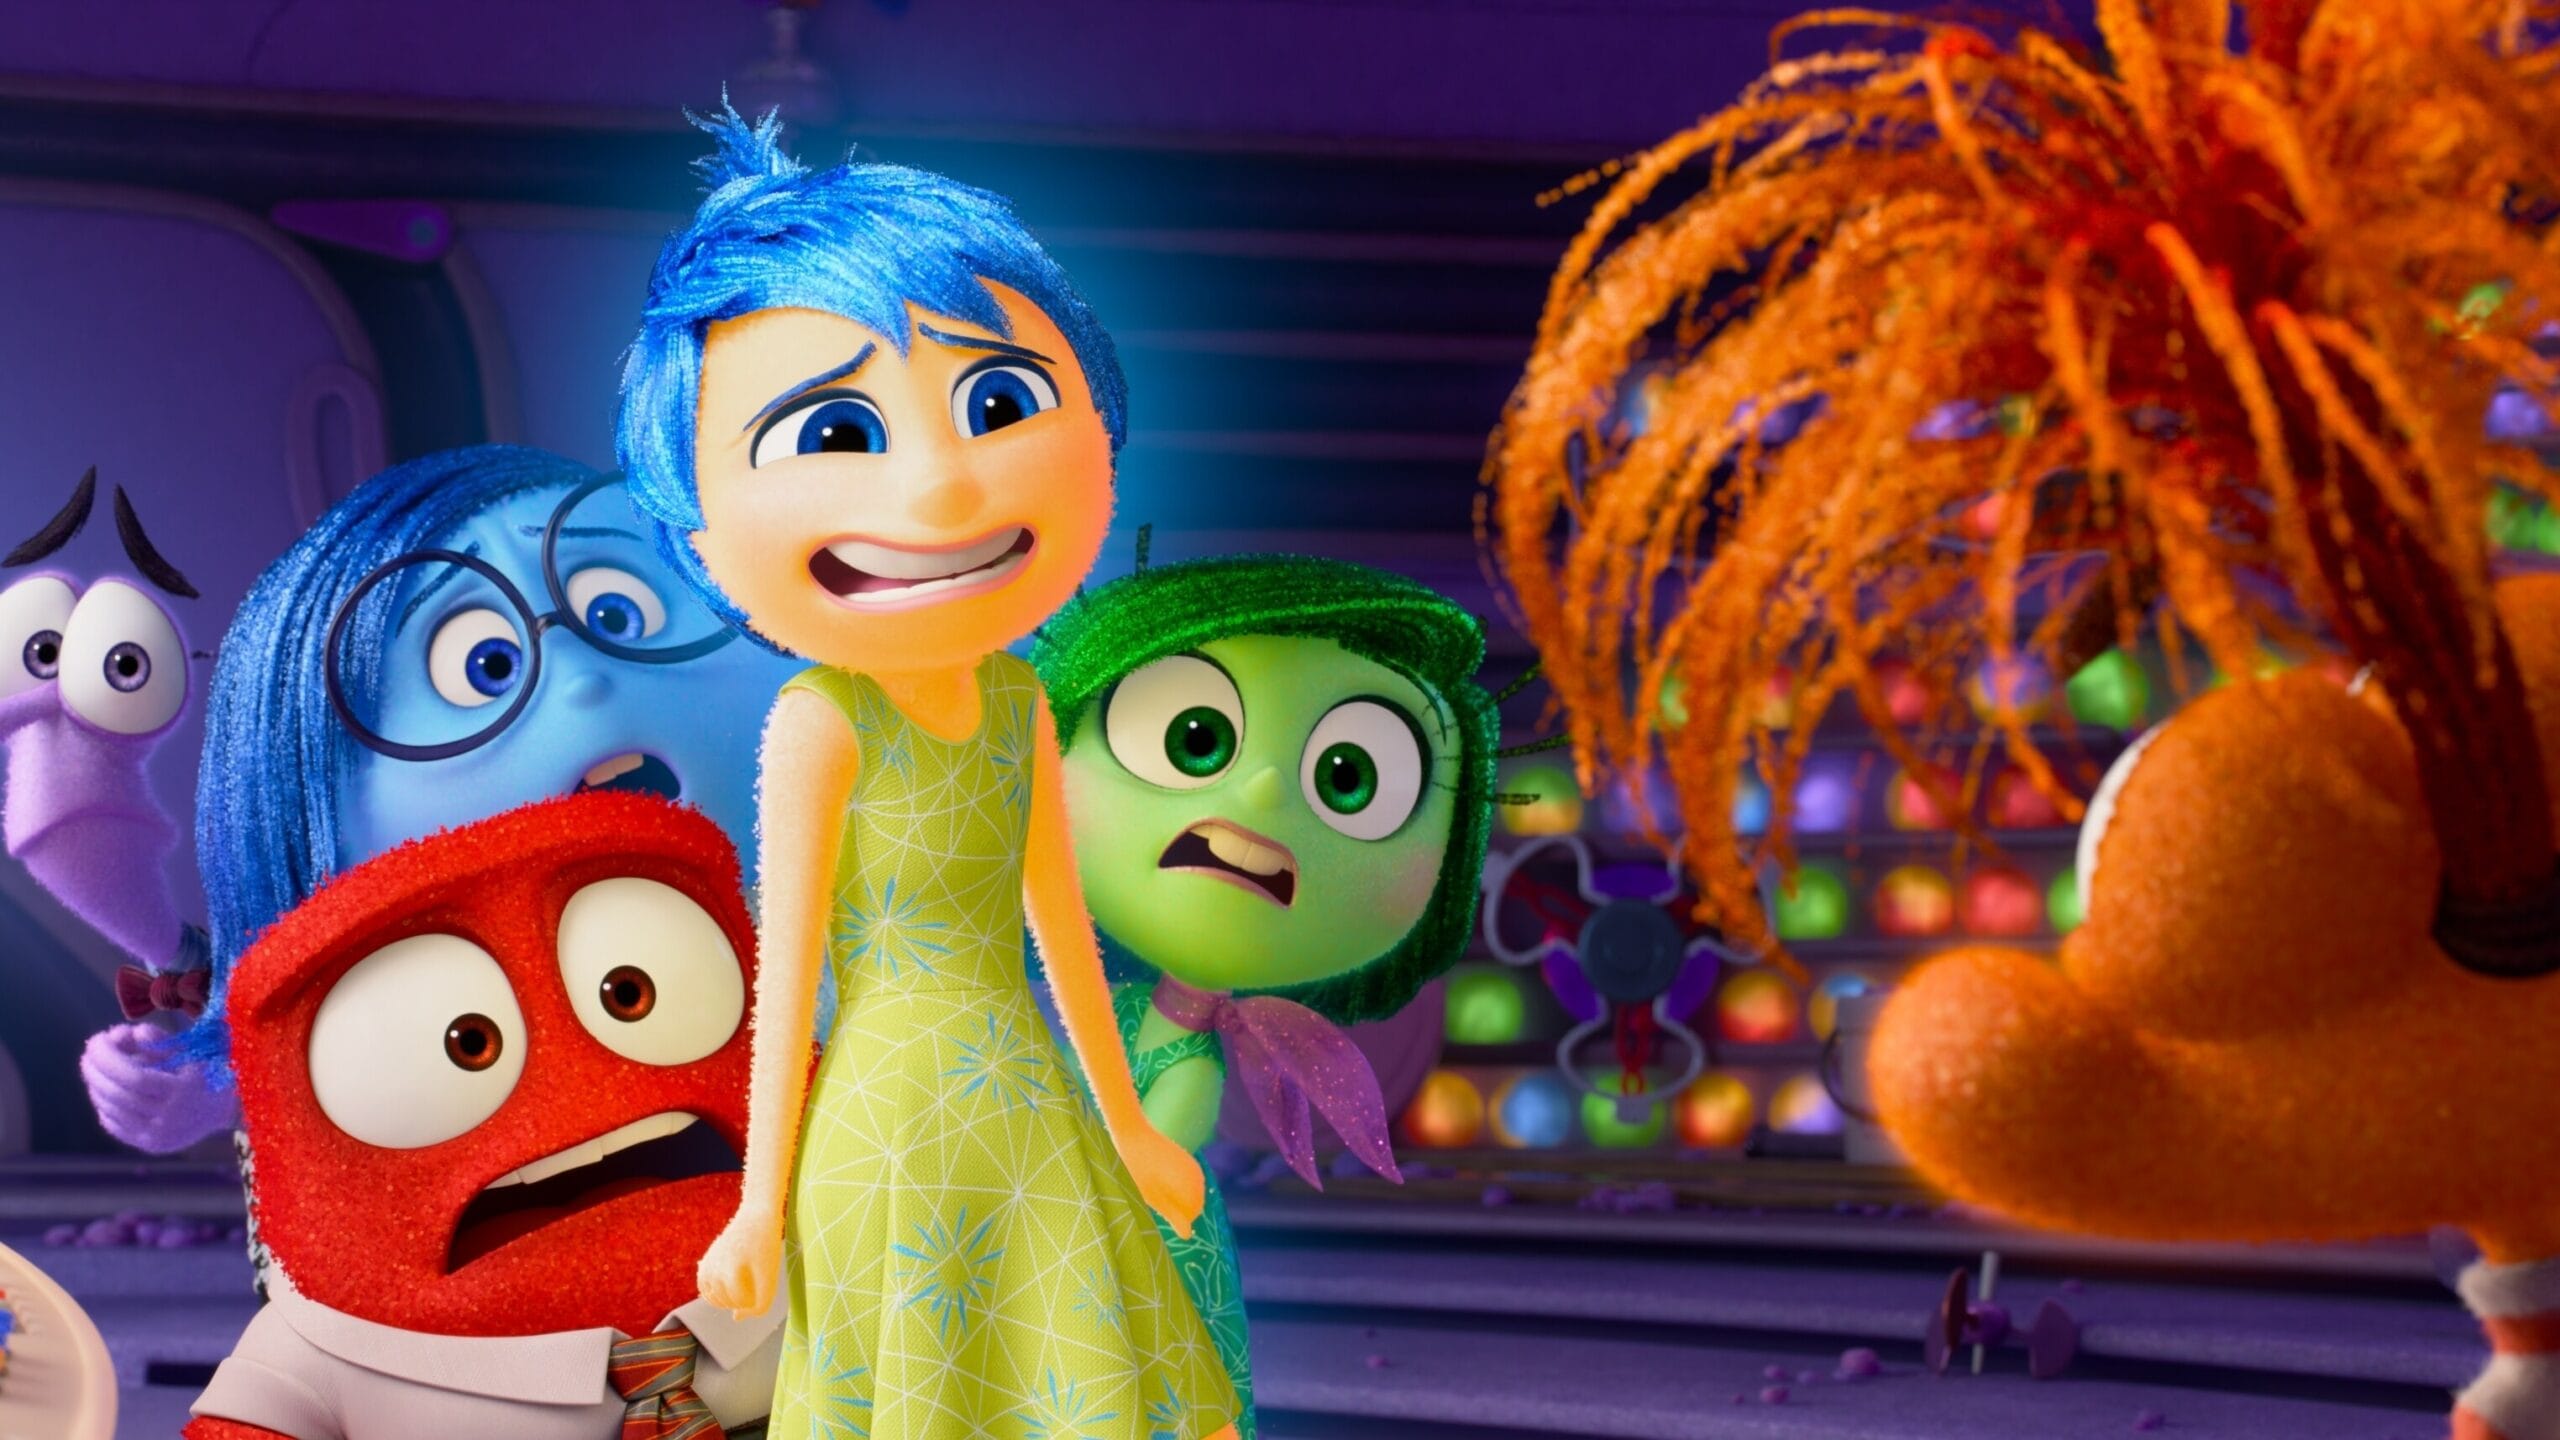 A parent’s guide to ‘Inside Out 2’: What to know before seeing the movie with kids